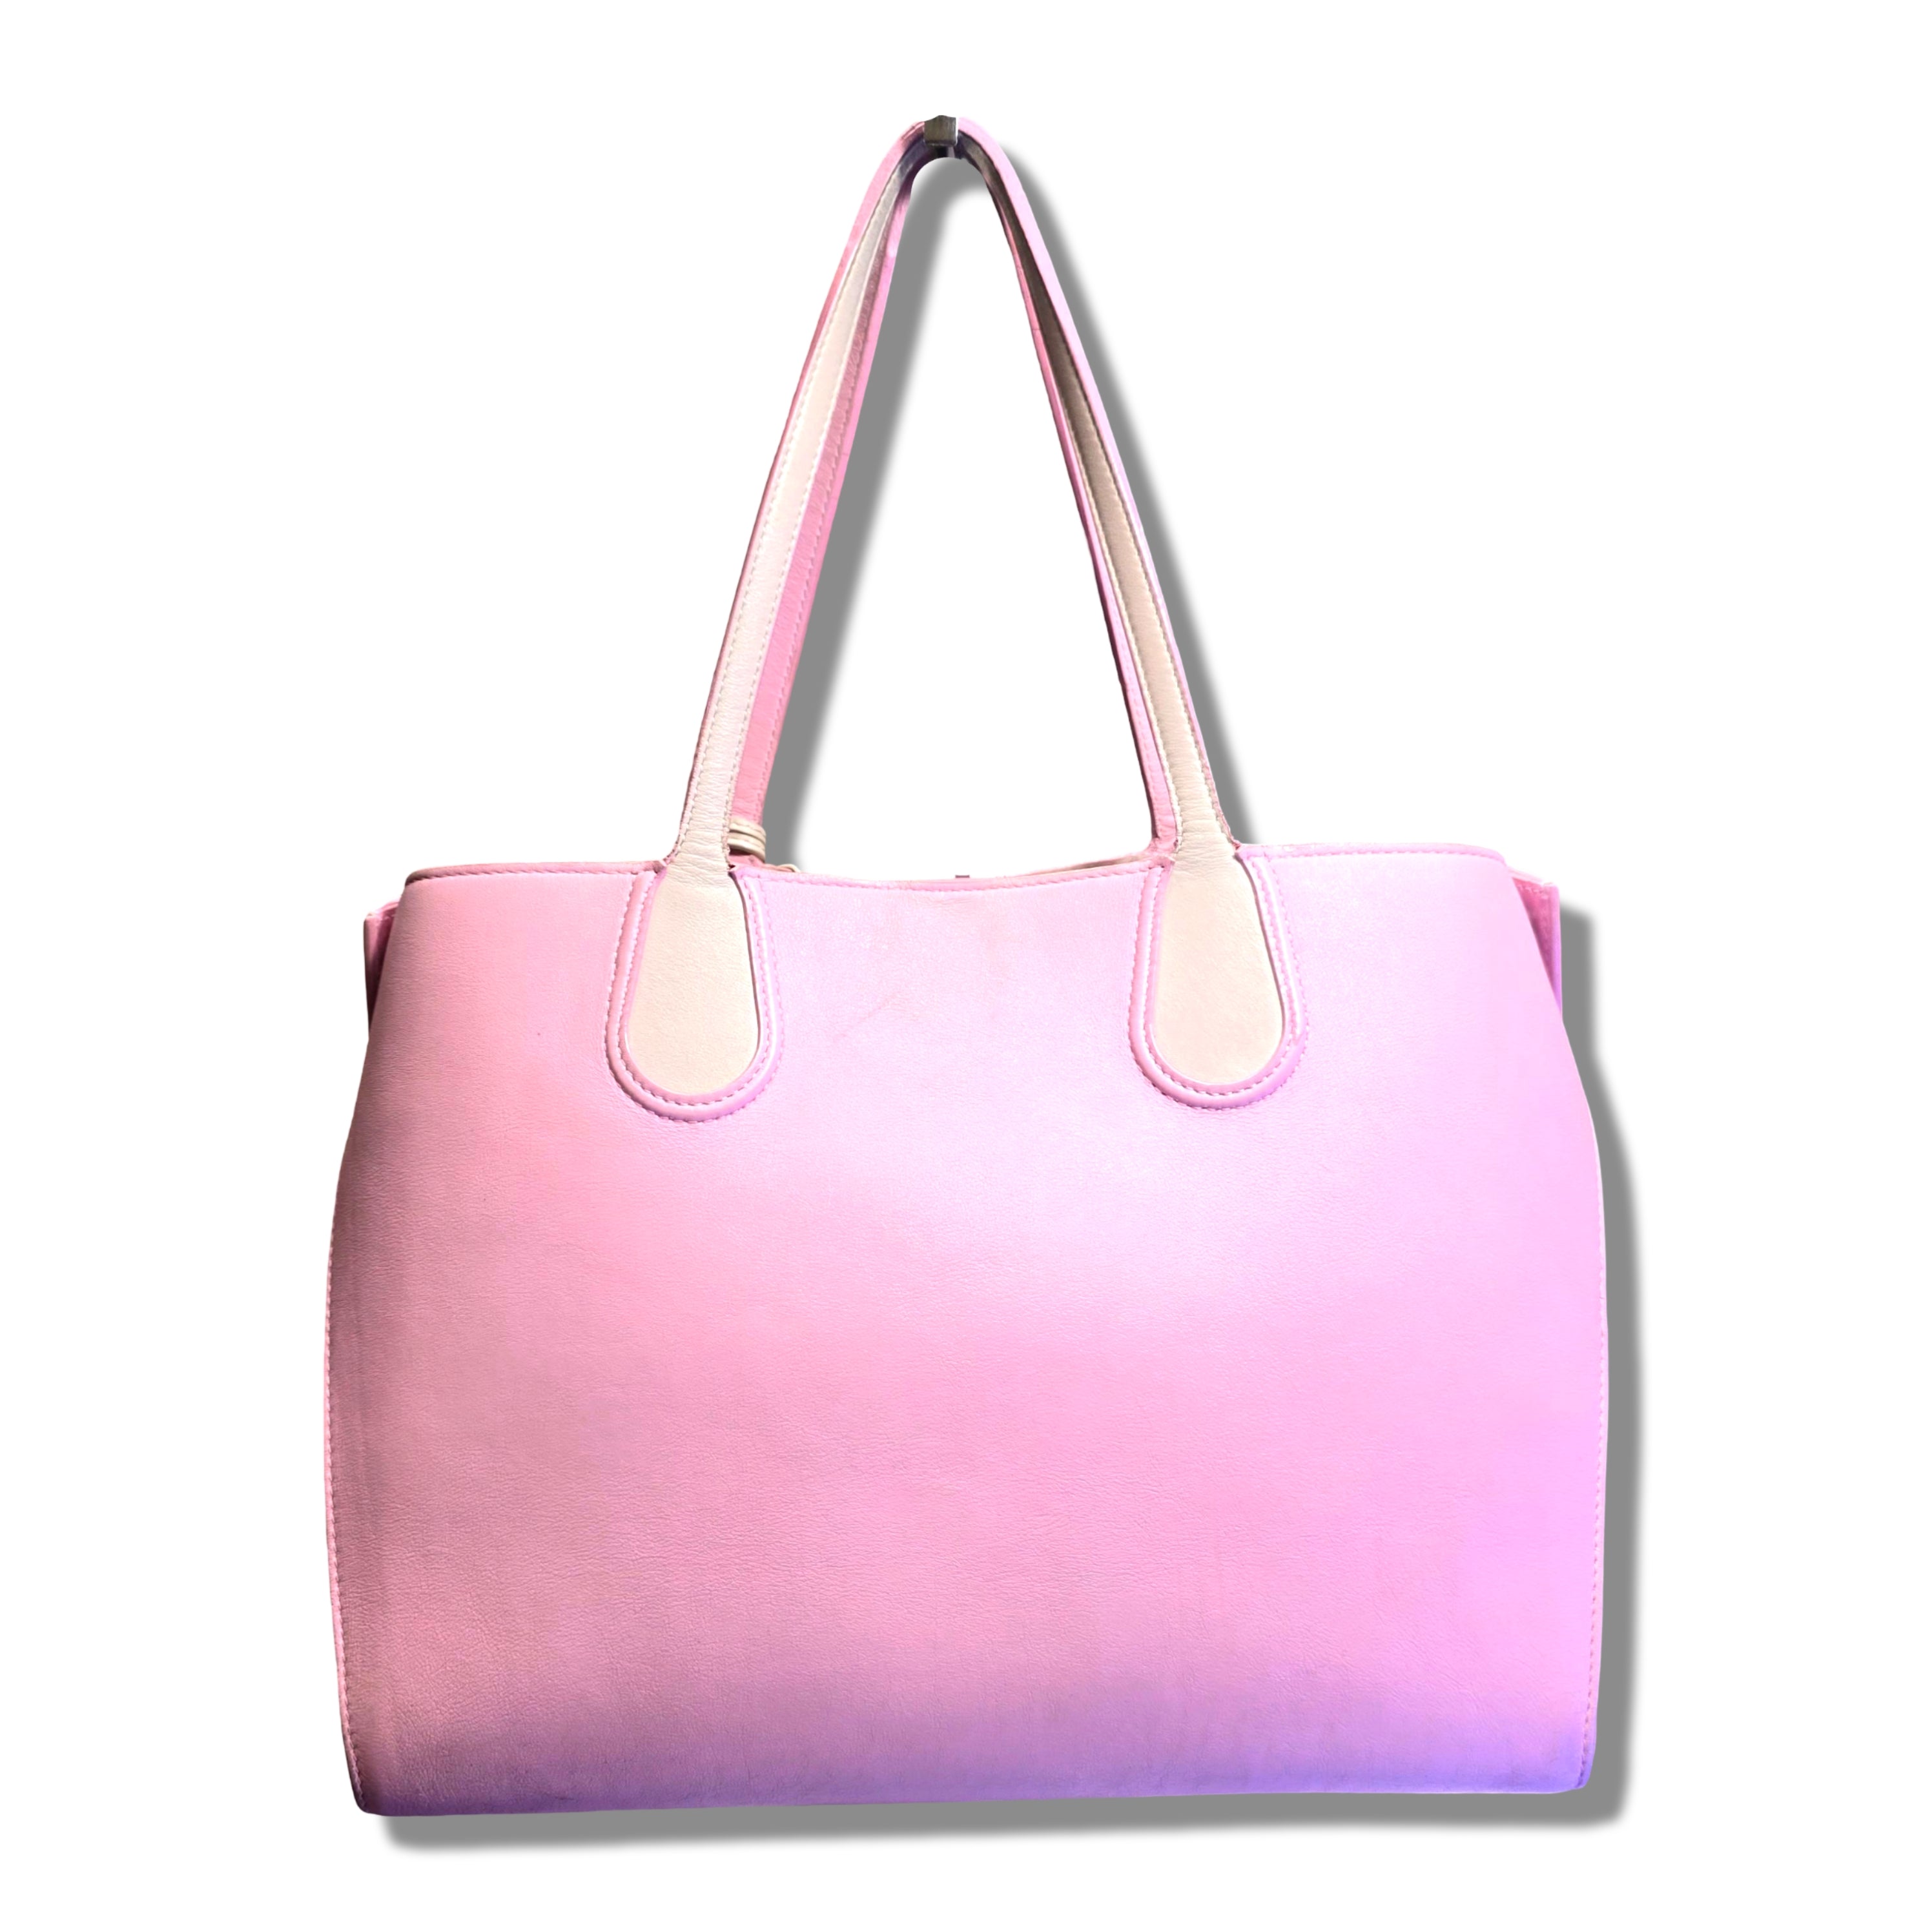 Dior Addict Shopping Tote Pink